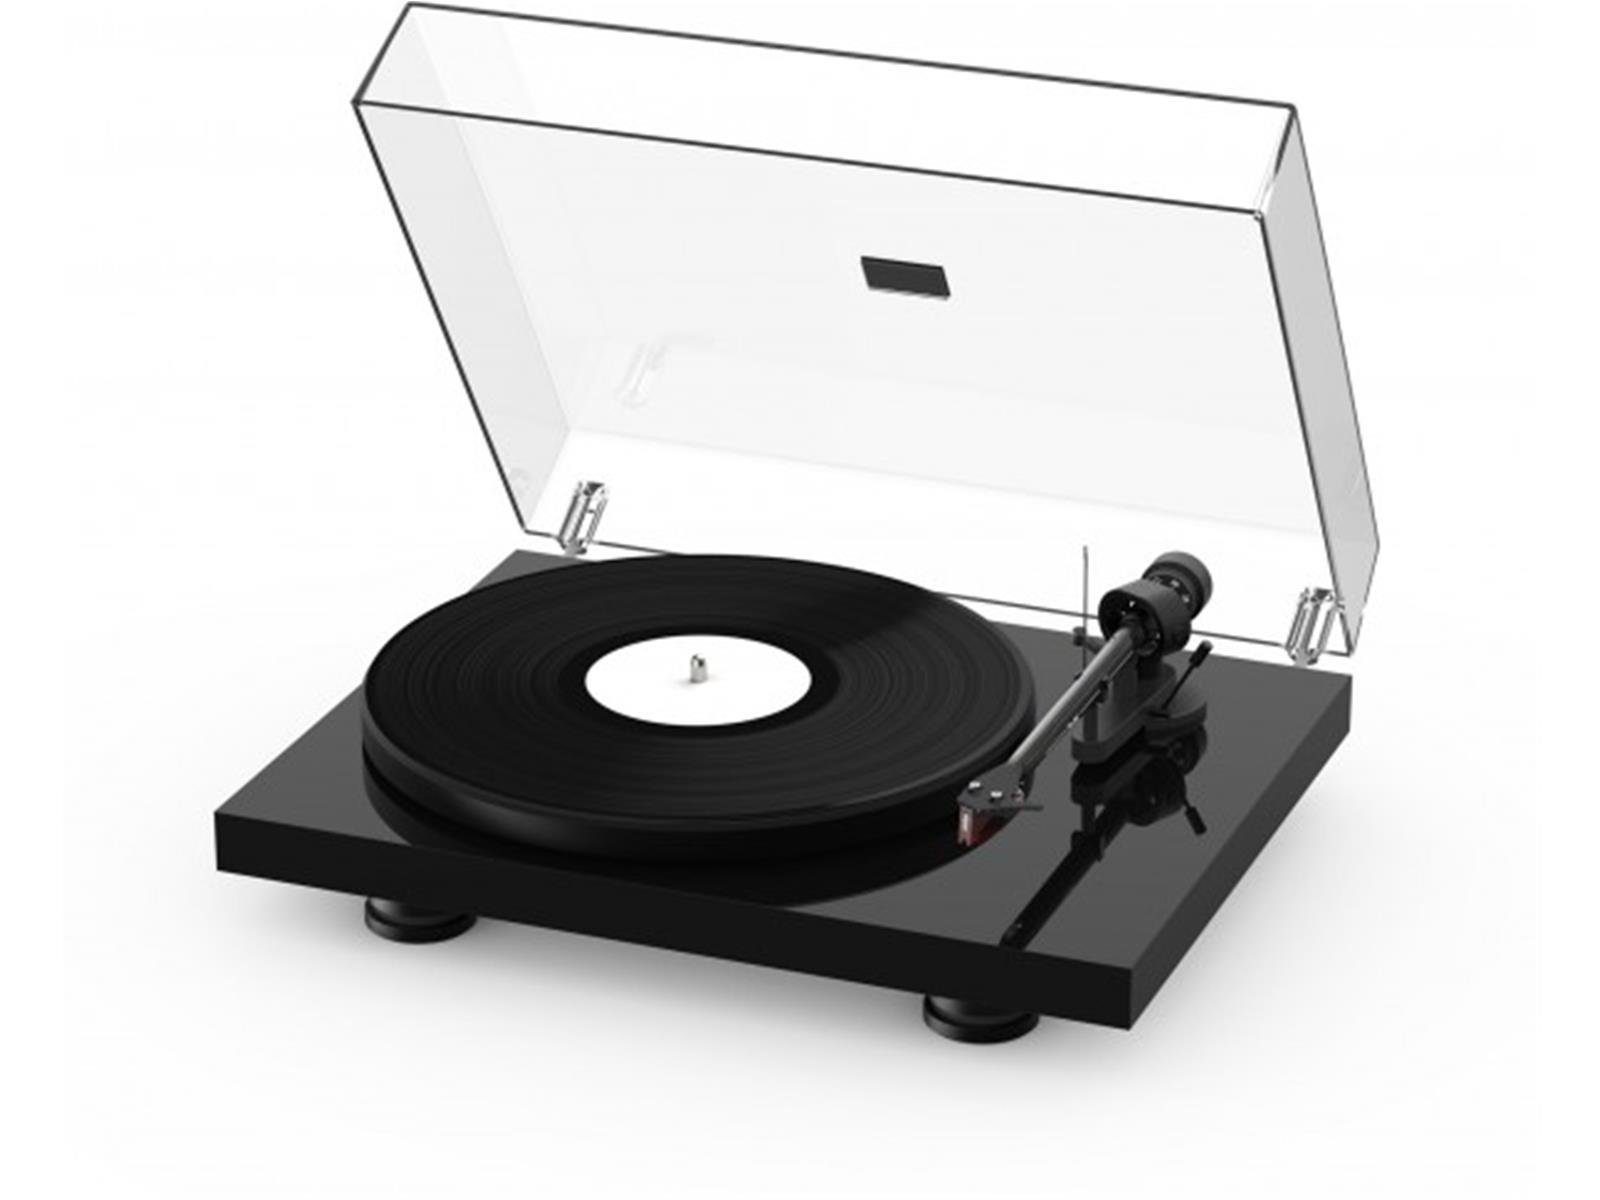 Pro-Ject Pro-Ject Debut Carbon EVO Plattenspieler Plattenspieler Hochglanz Schwarz | Plattenspieler